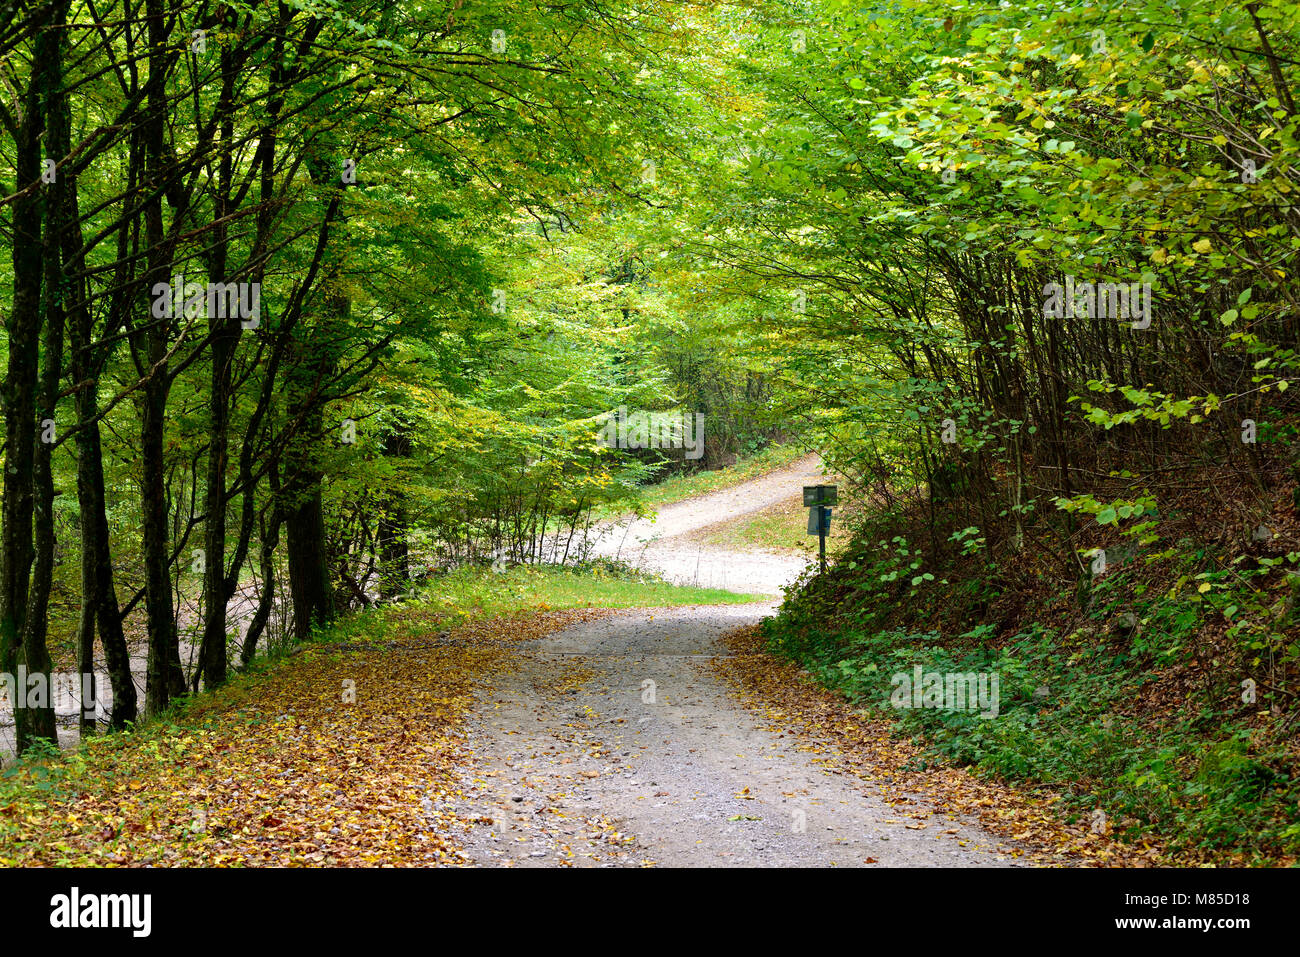 An early autumn view of a leafy twisting path in a sunlit forest in Alsace, France Stock Photo